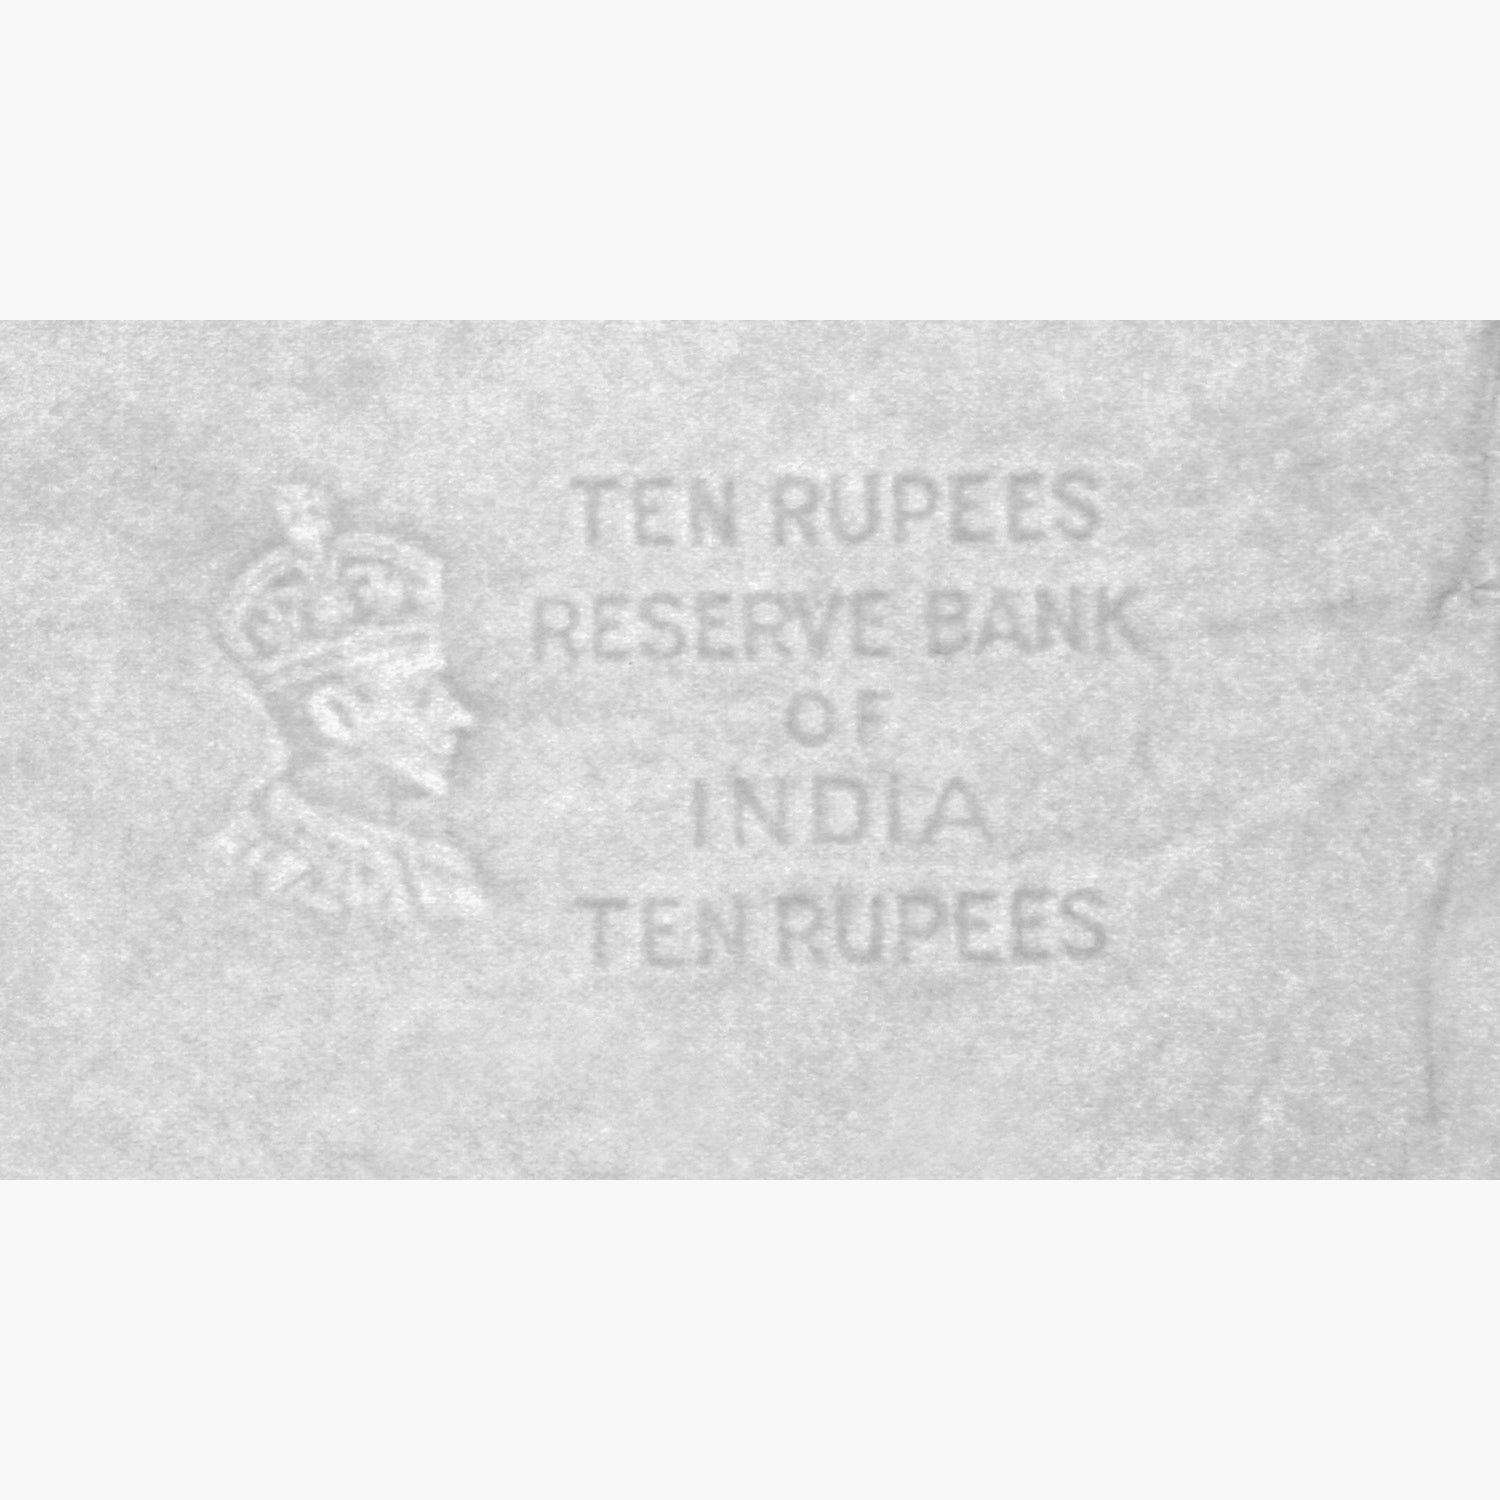 10 Rupees “Wreck banknote”